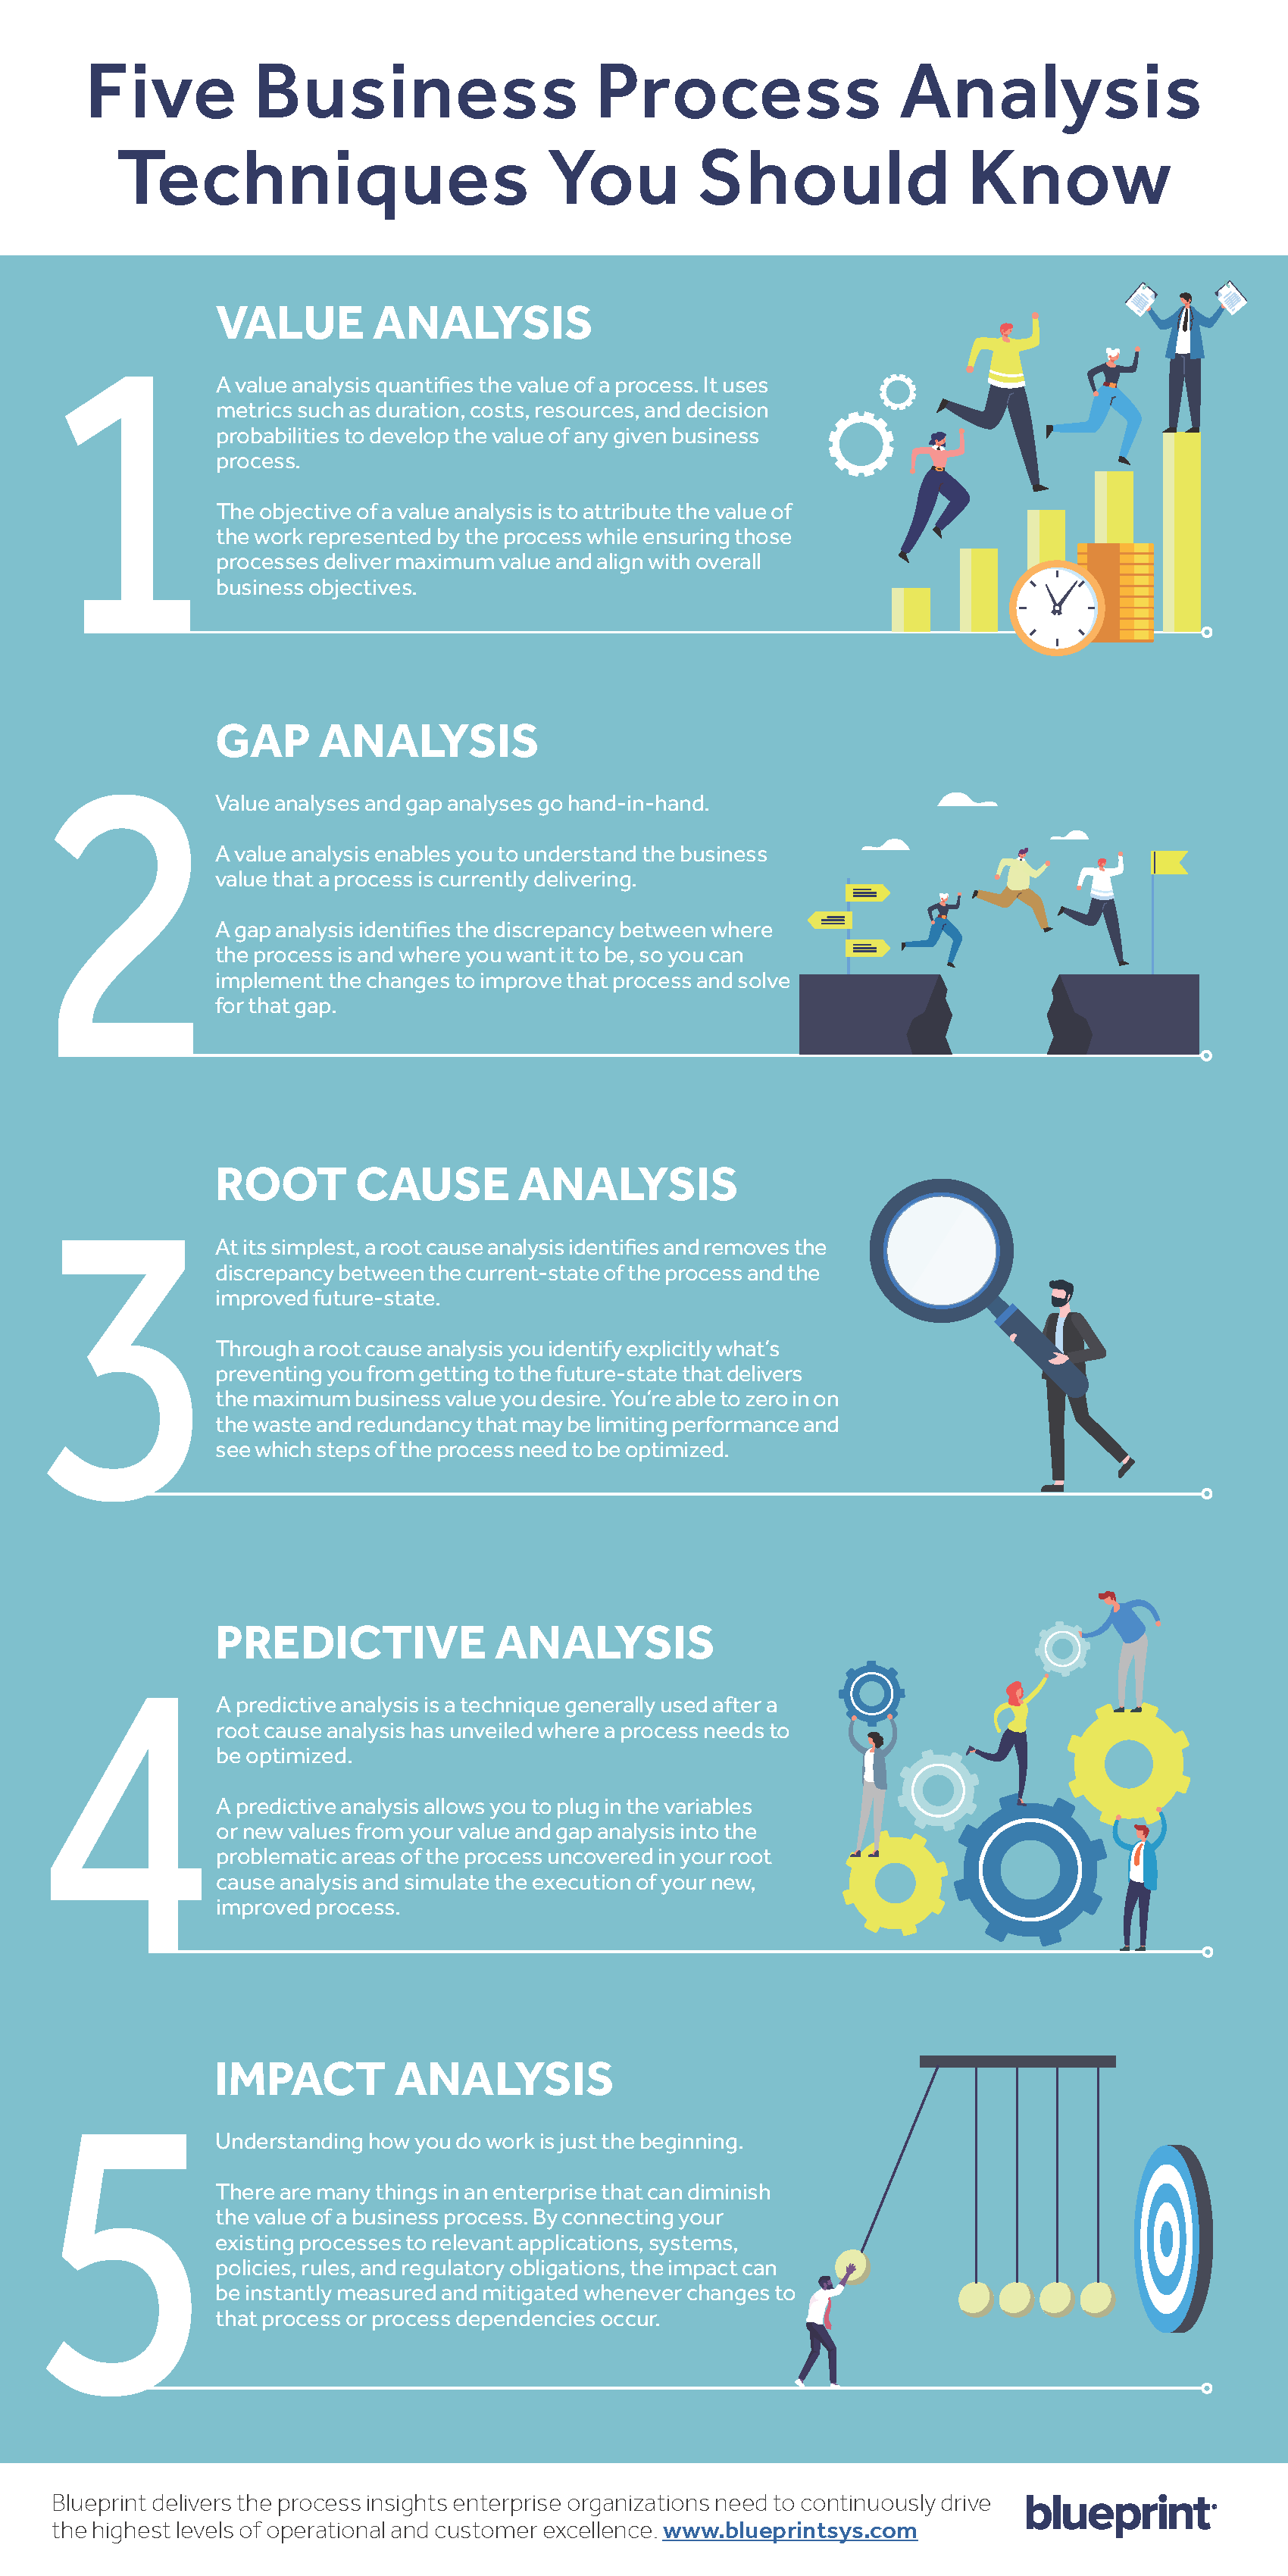 INFOGRAPHIC: Five Business Process Analysis (BPA) Techniques You Should Know